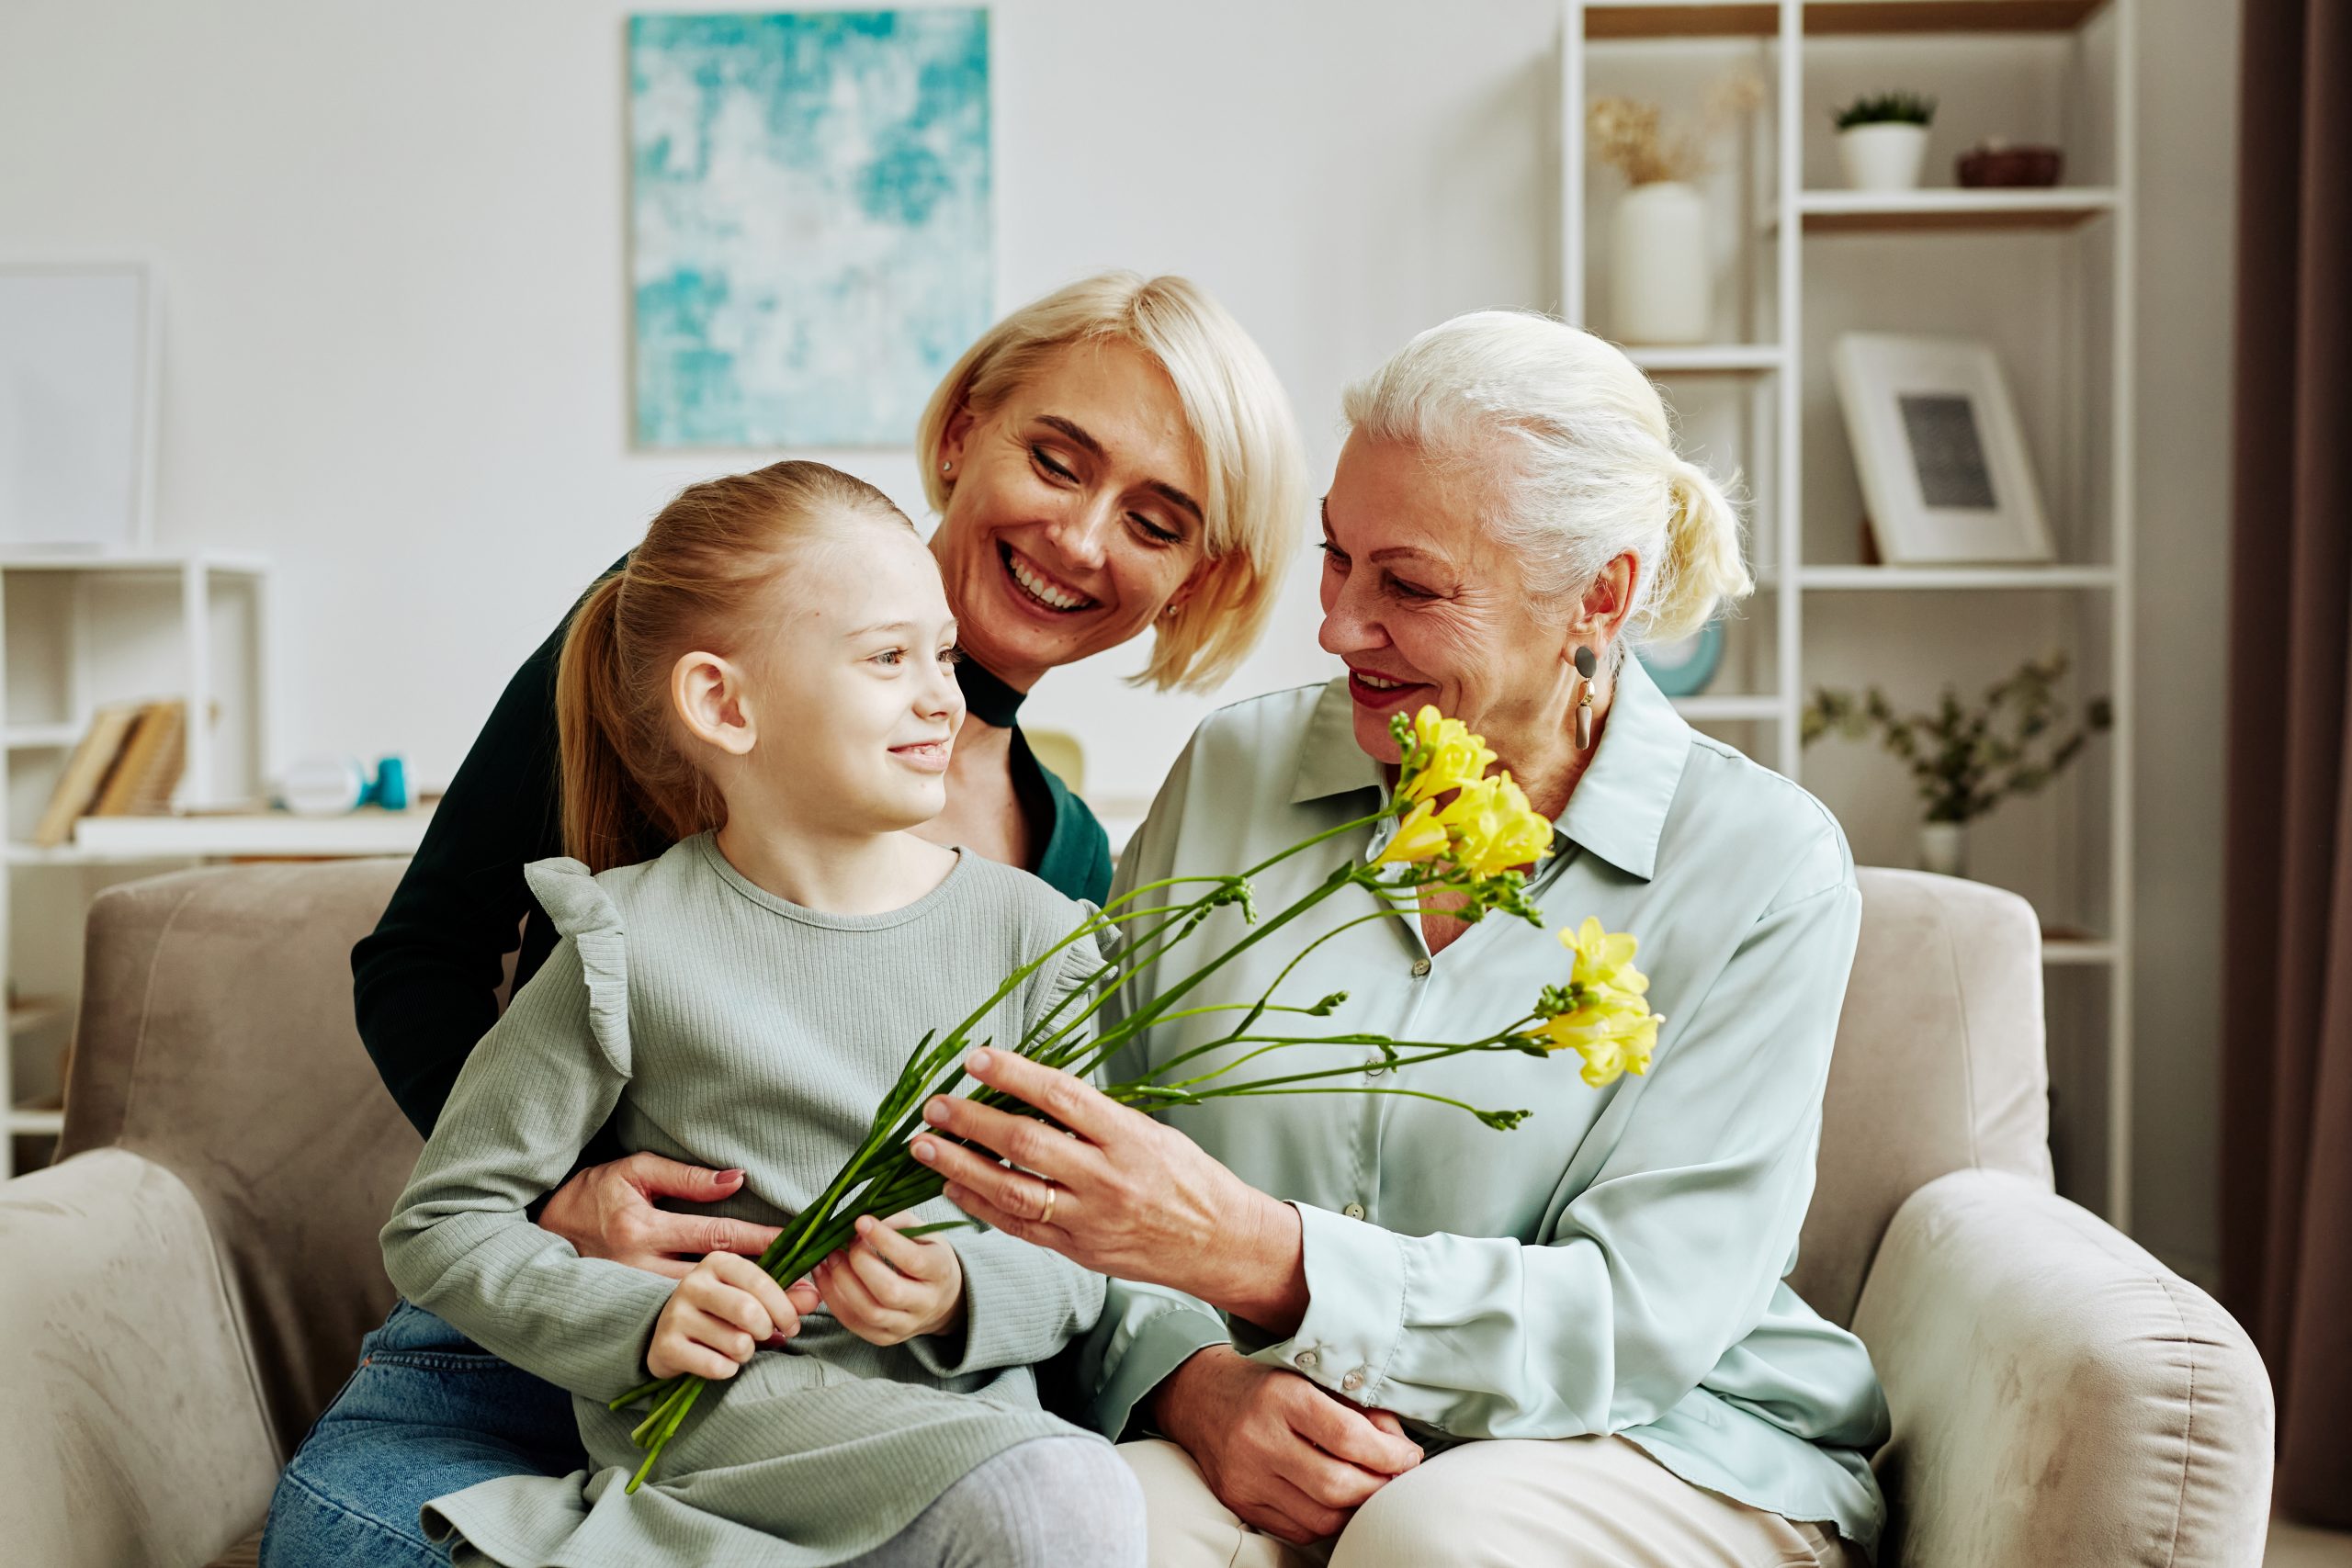 Portrait of smiling little girl giving flowers to grandmother on Mothers day in cozy home scene